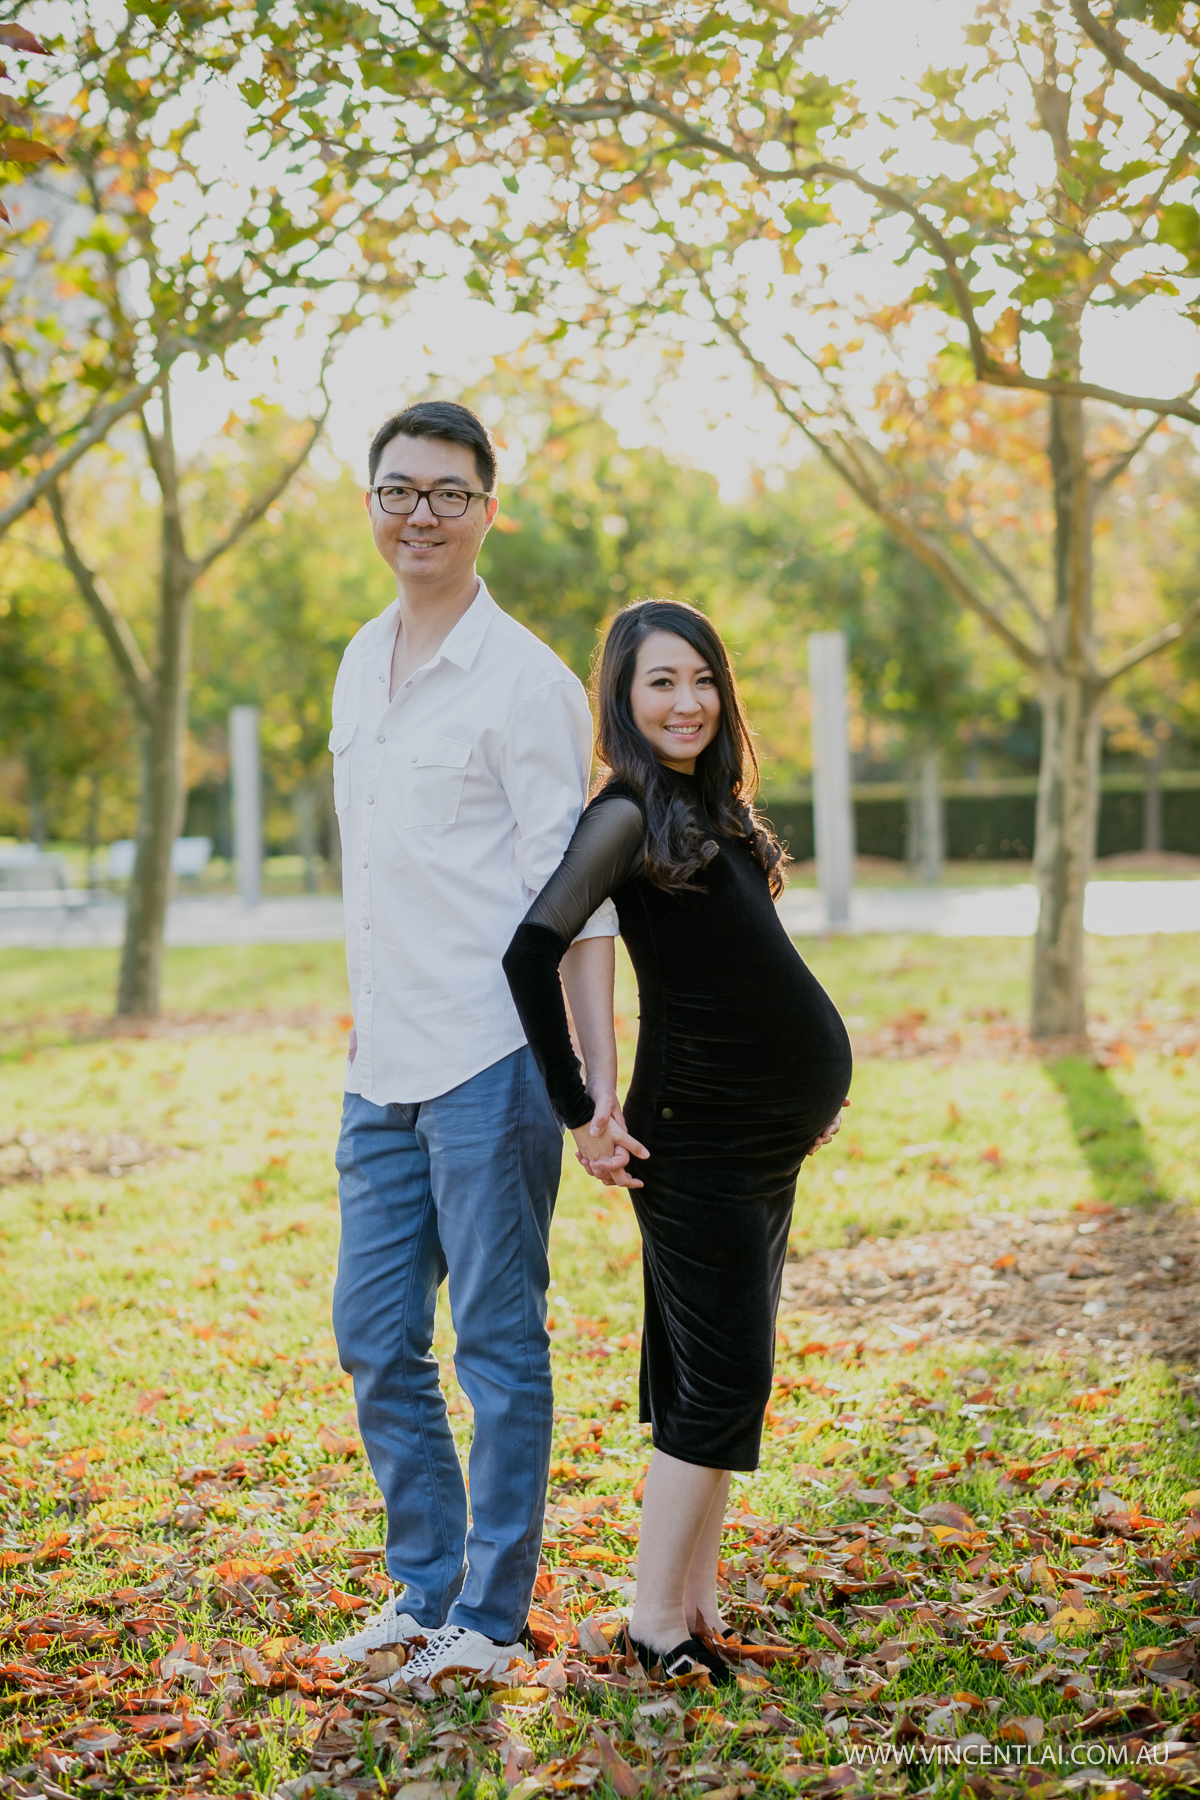 Autumn Maternity Photography Session